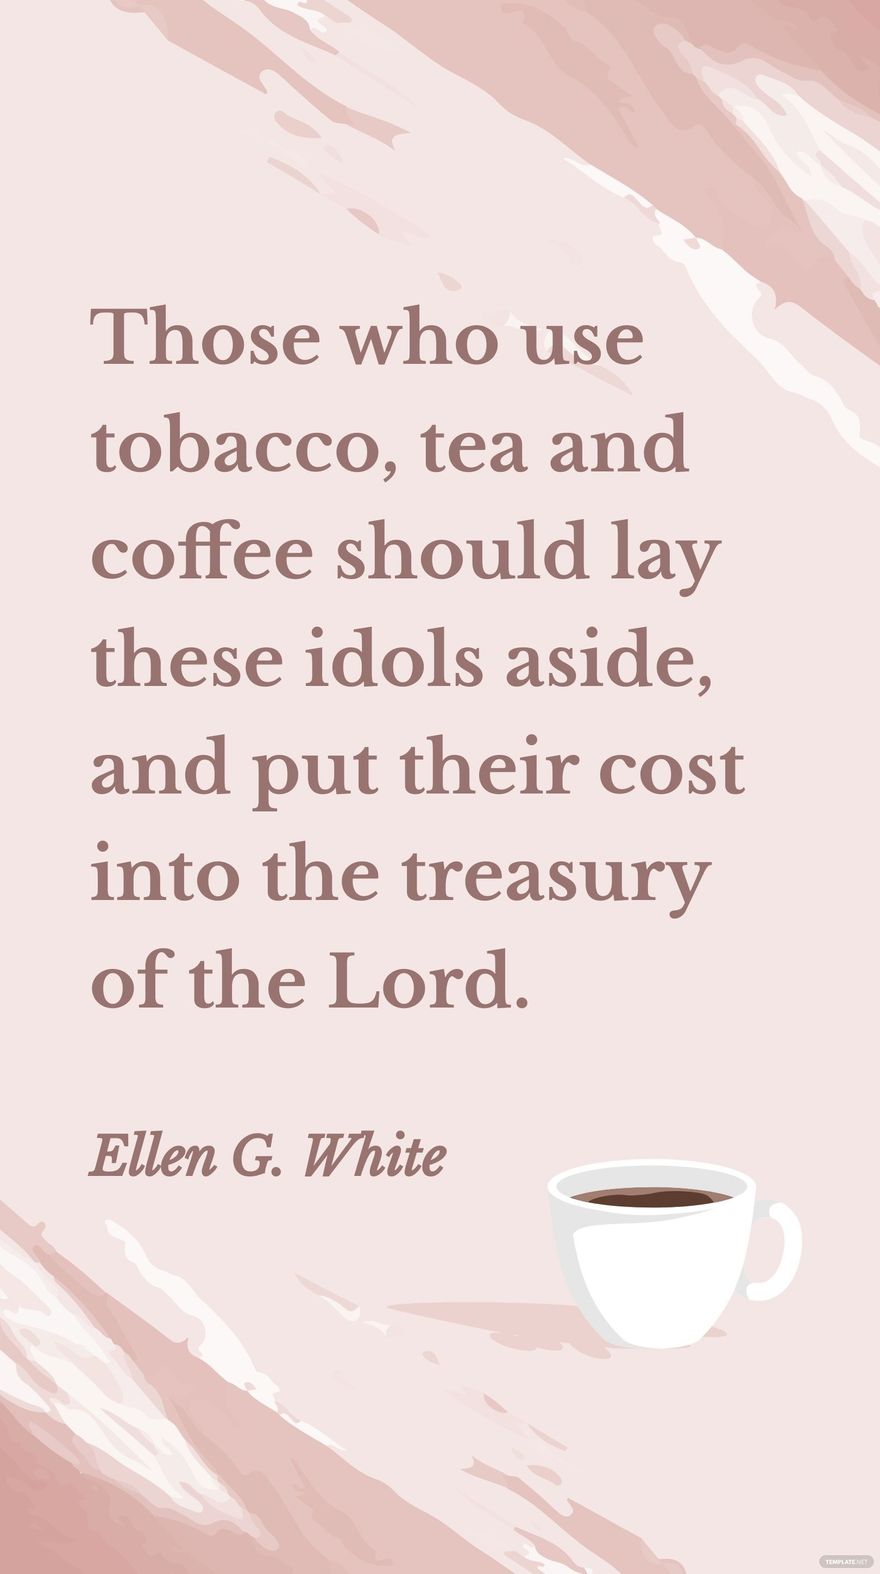 Ellen G. White - Those who use tobacco, tea and coffee should lay these idols aside, and put their cost into the treasury of the Lord. in JPG